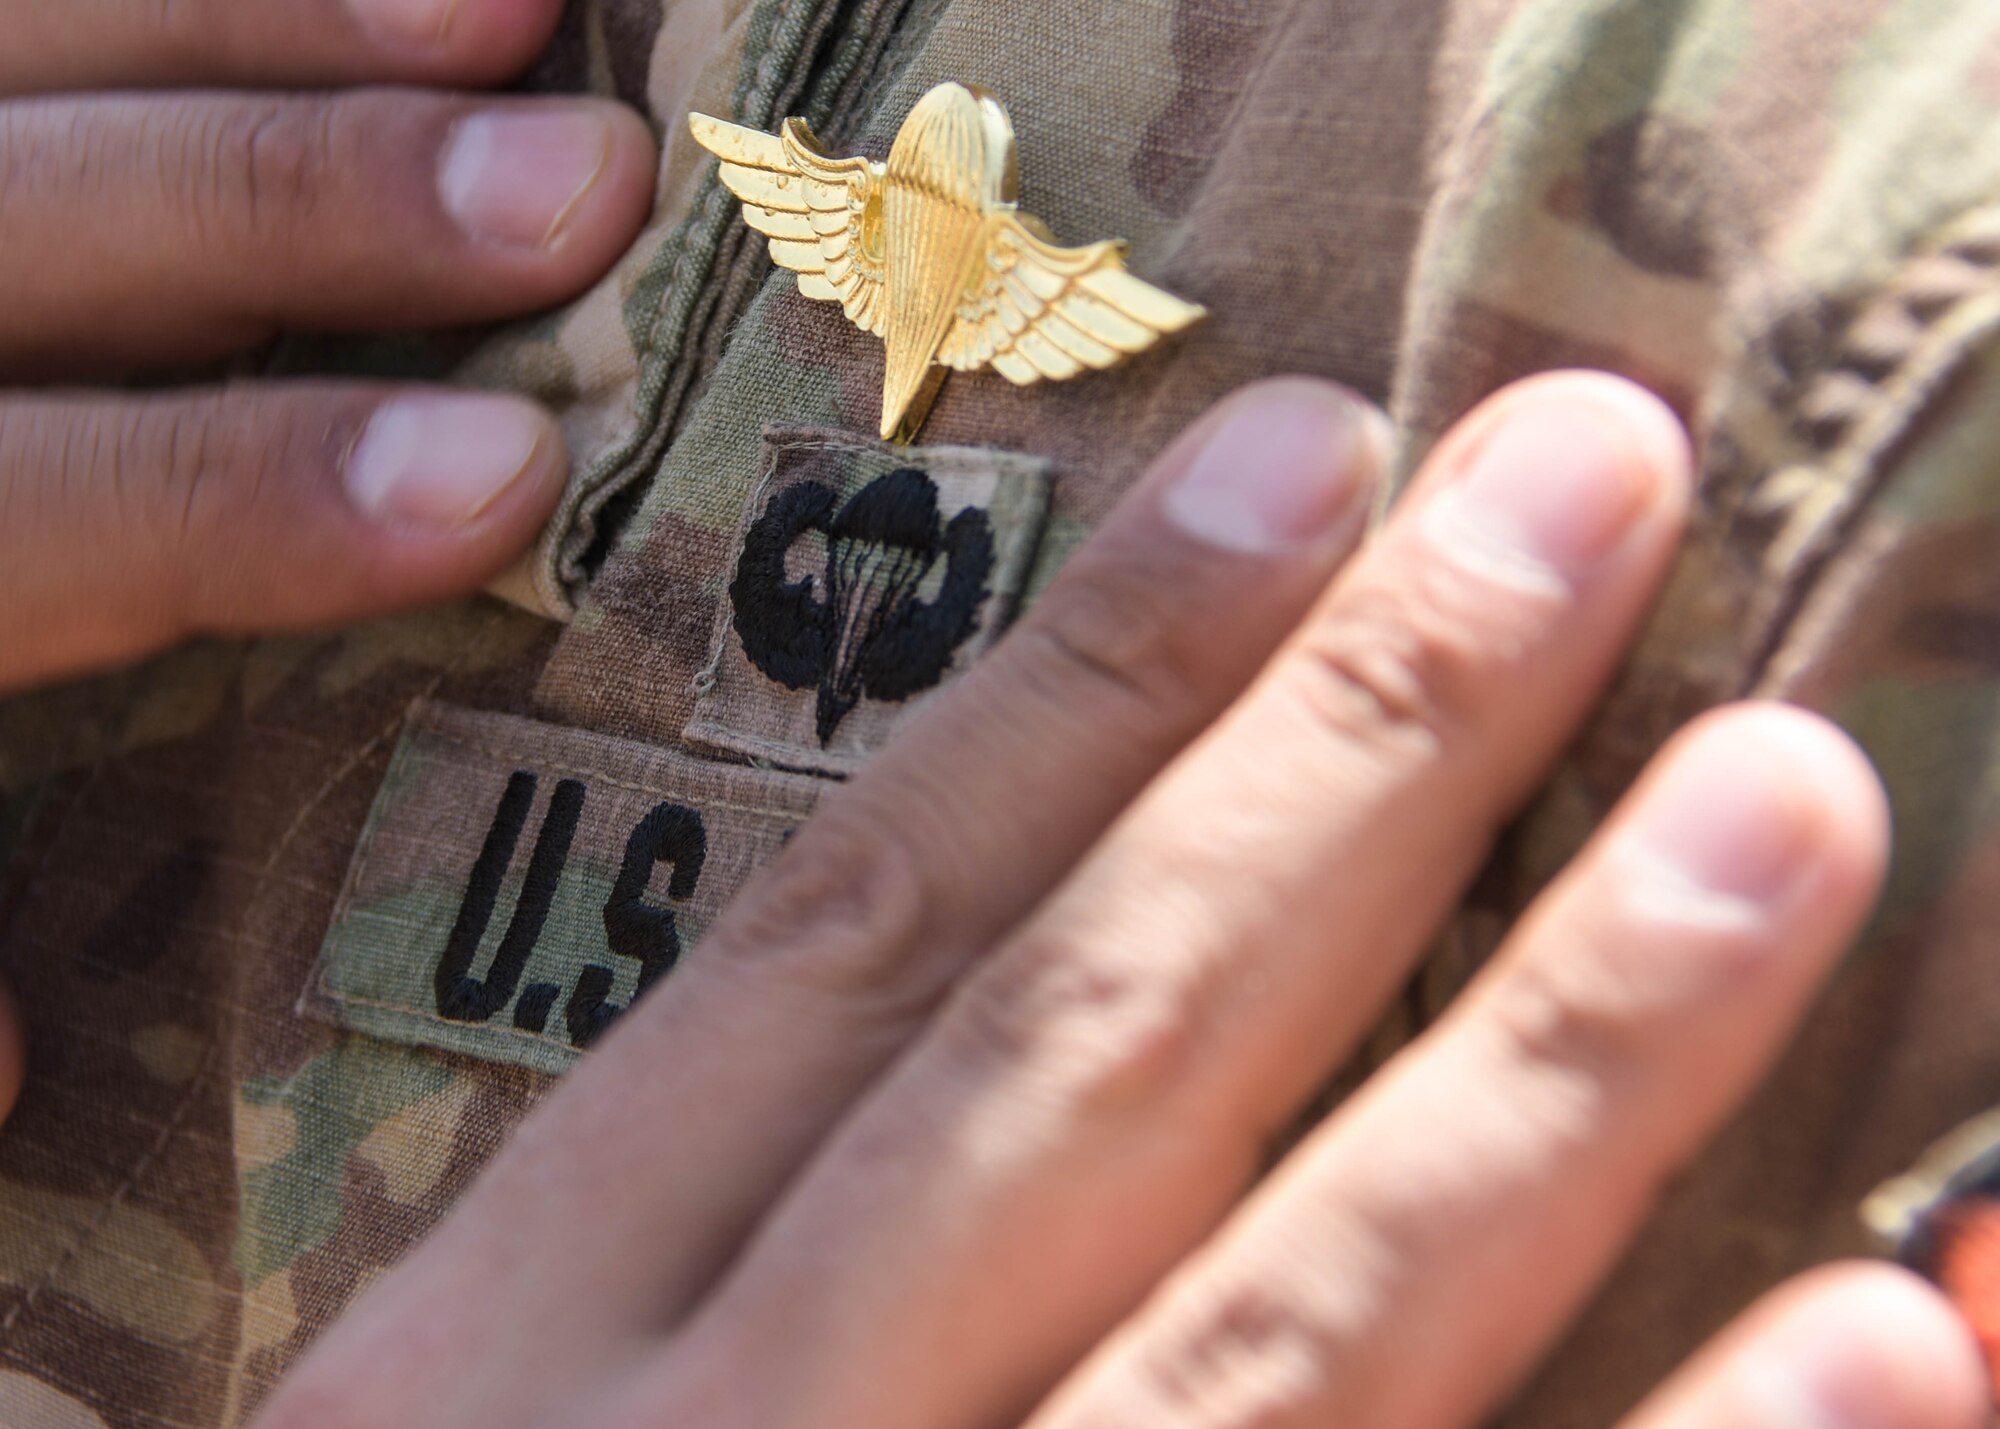 A U.S. service member gets jump wings pinned on for his participation in the Friendship Jump during Exercise Eager Lion on Sept. 5, 2019.